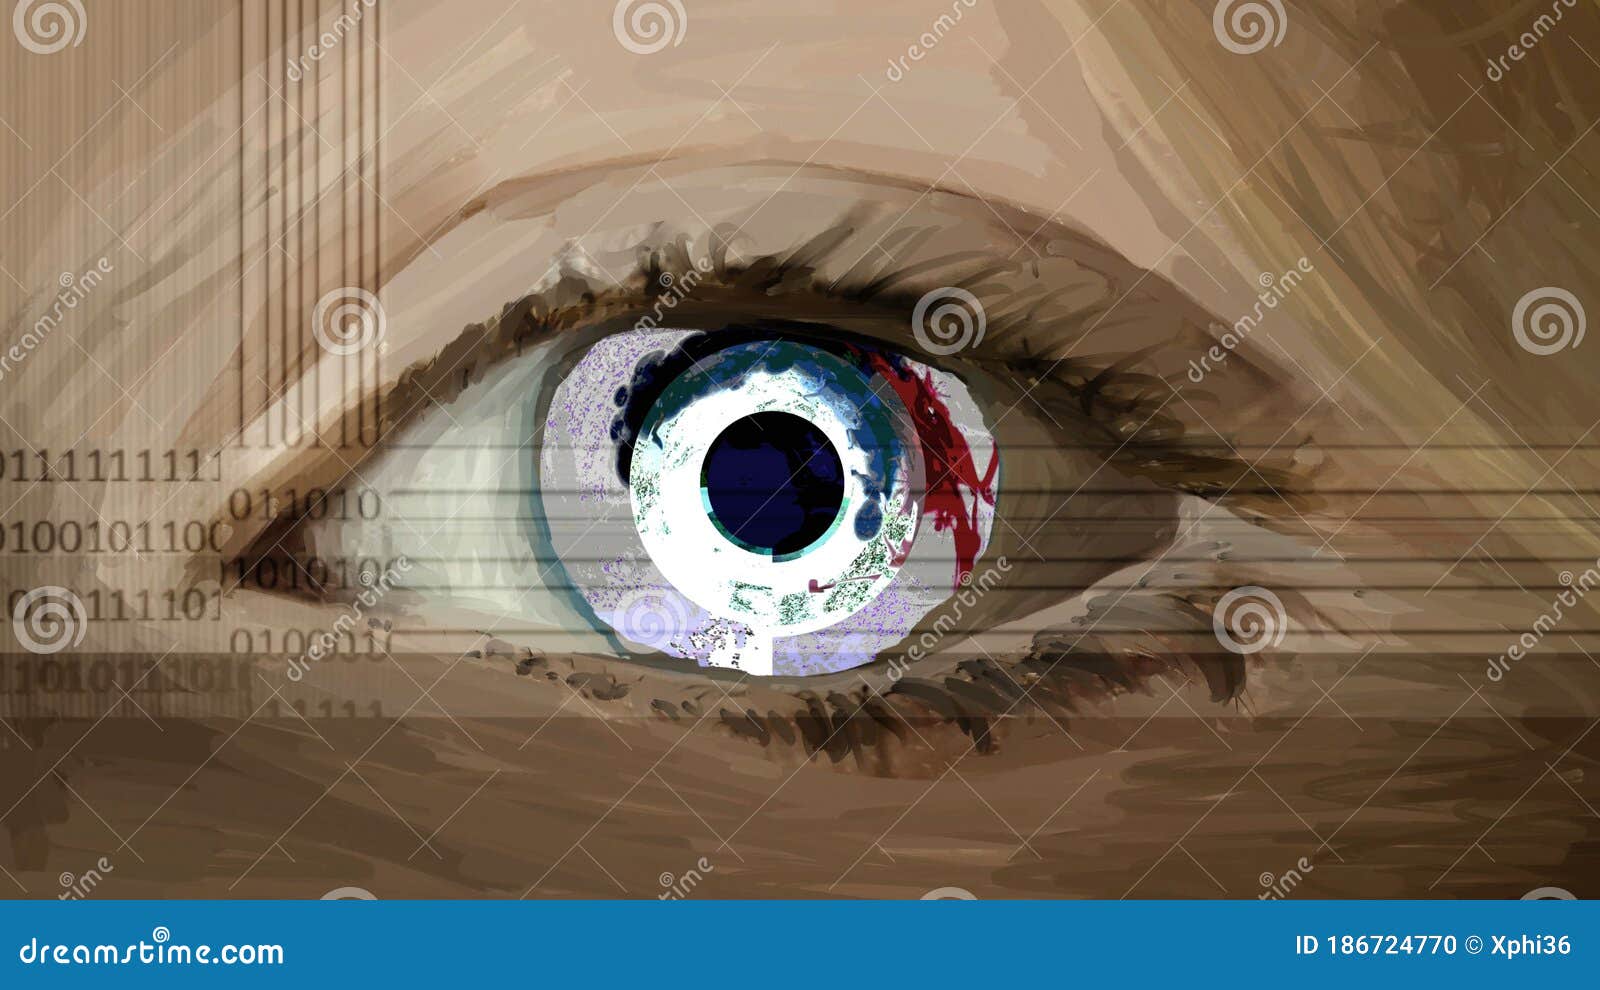 painted eye evoking biometry, facial and eye recognition, with computer code numbers integration